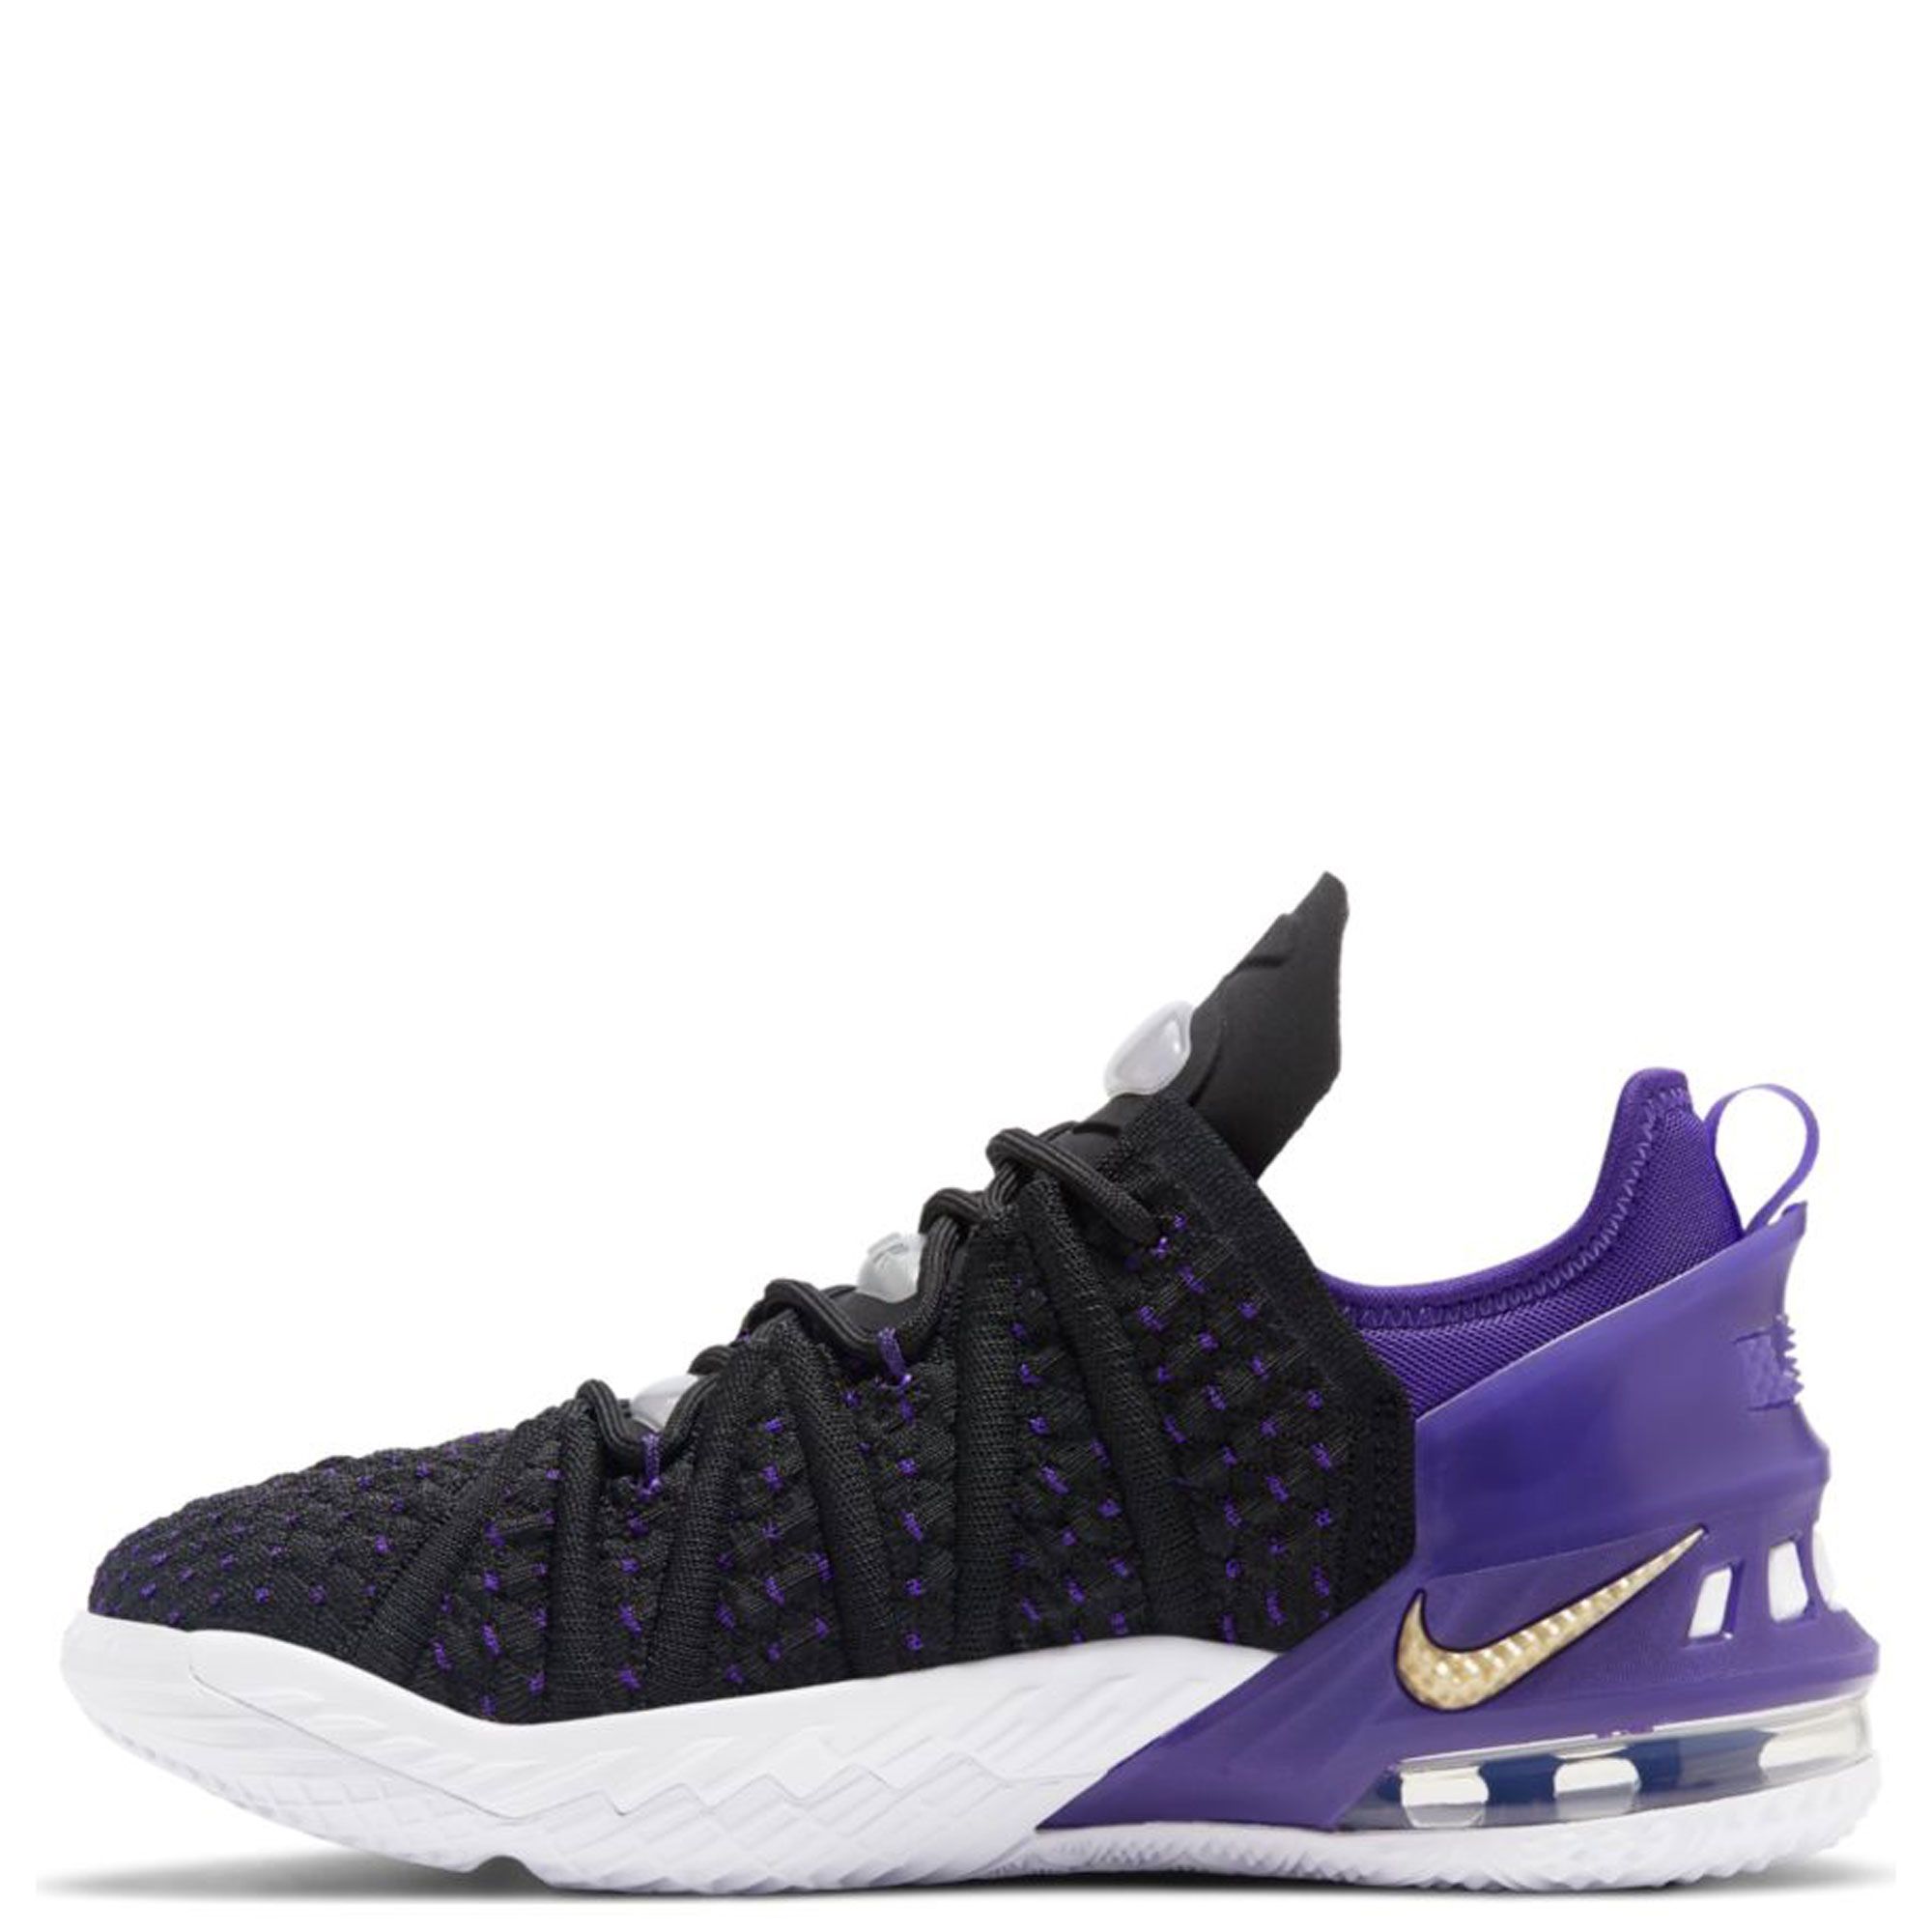 lebron shoes purple and gold